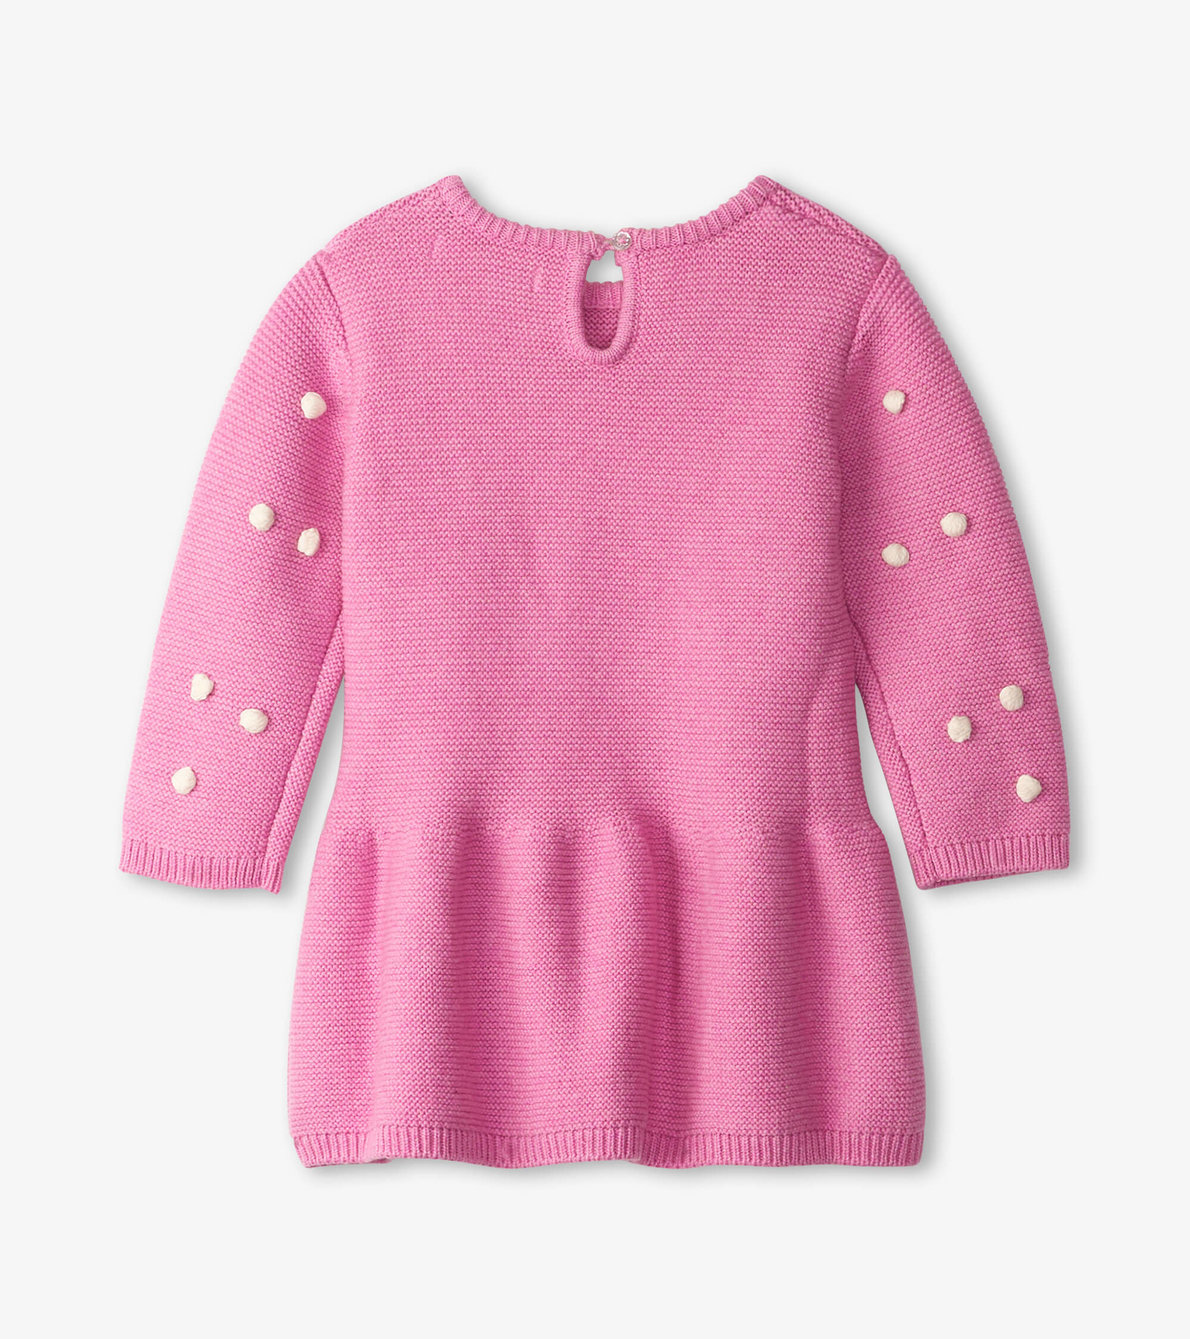 View larger image of Lovely Heart Baby Sweater Dress